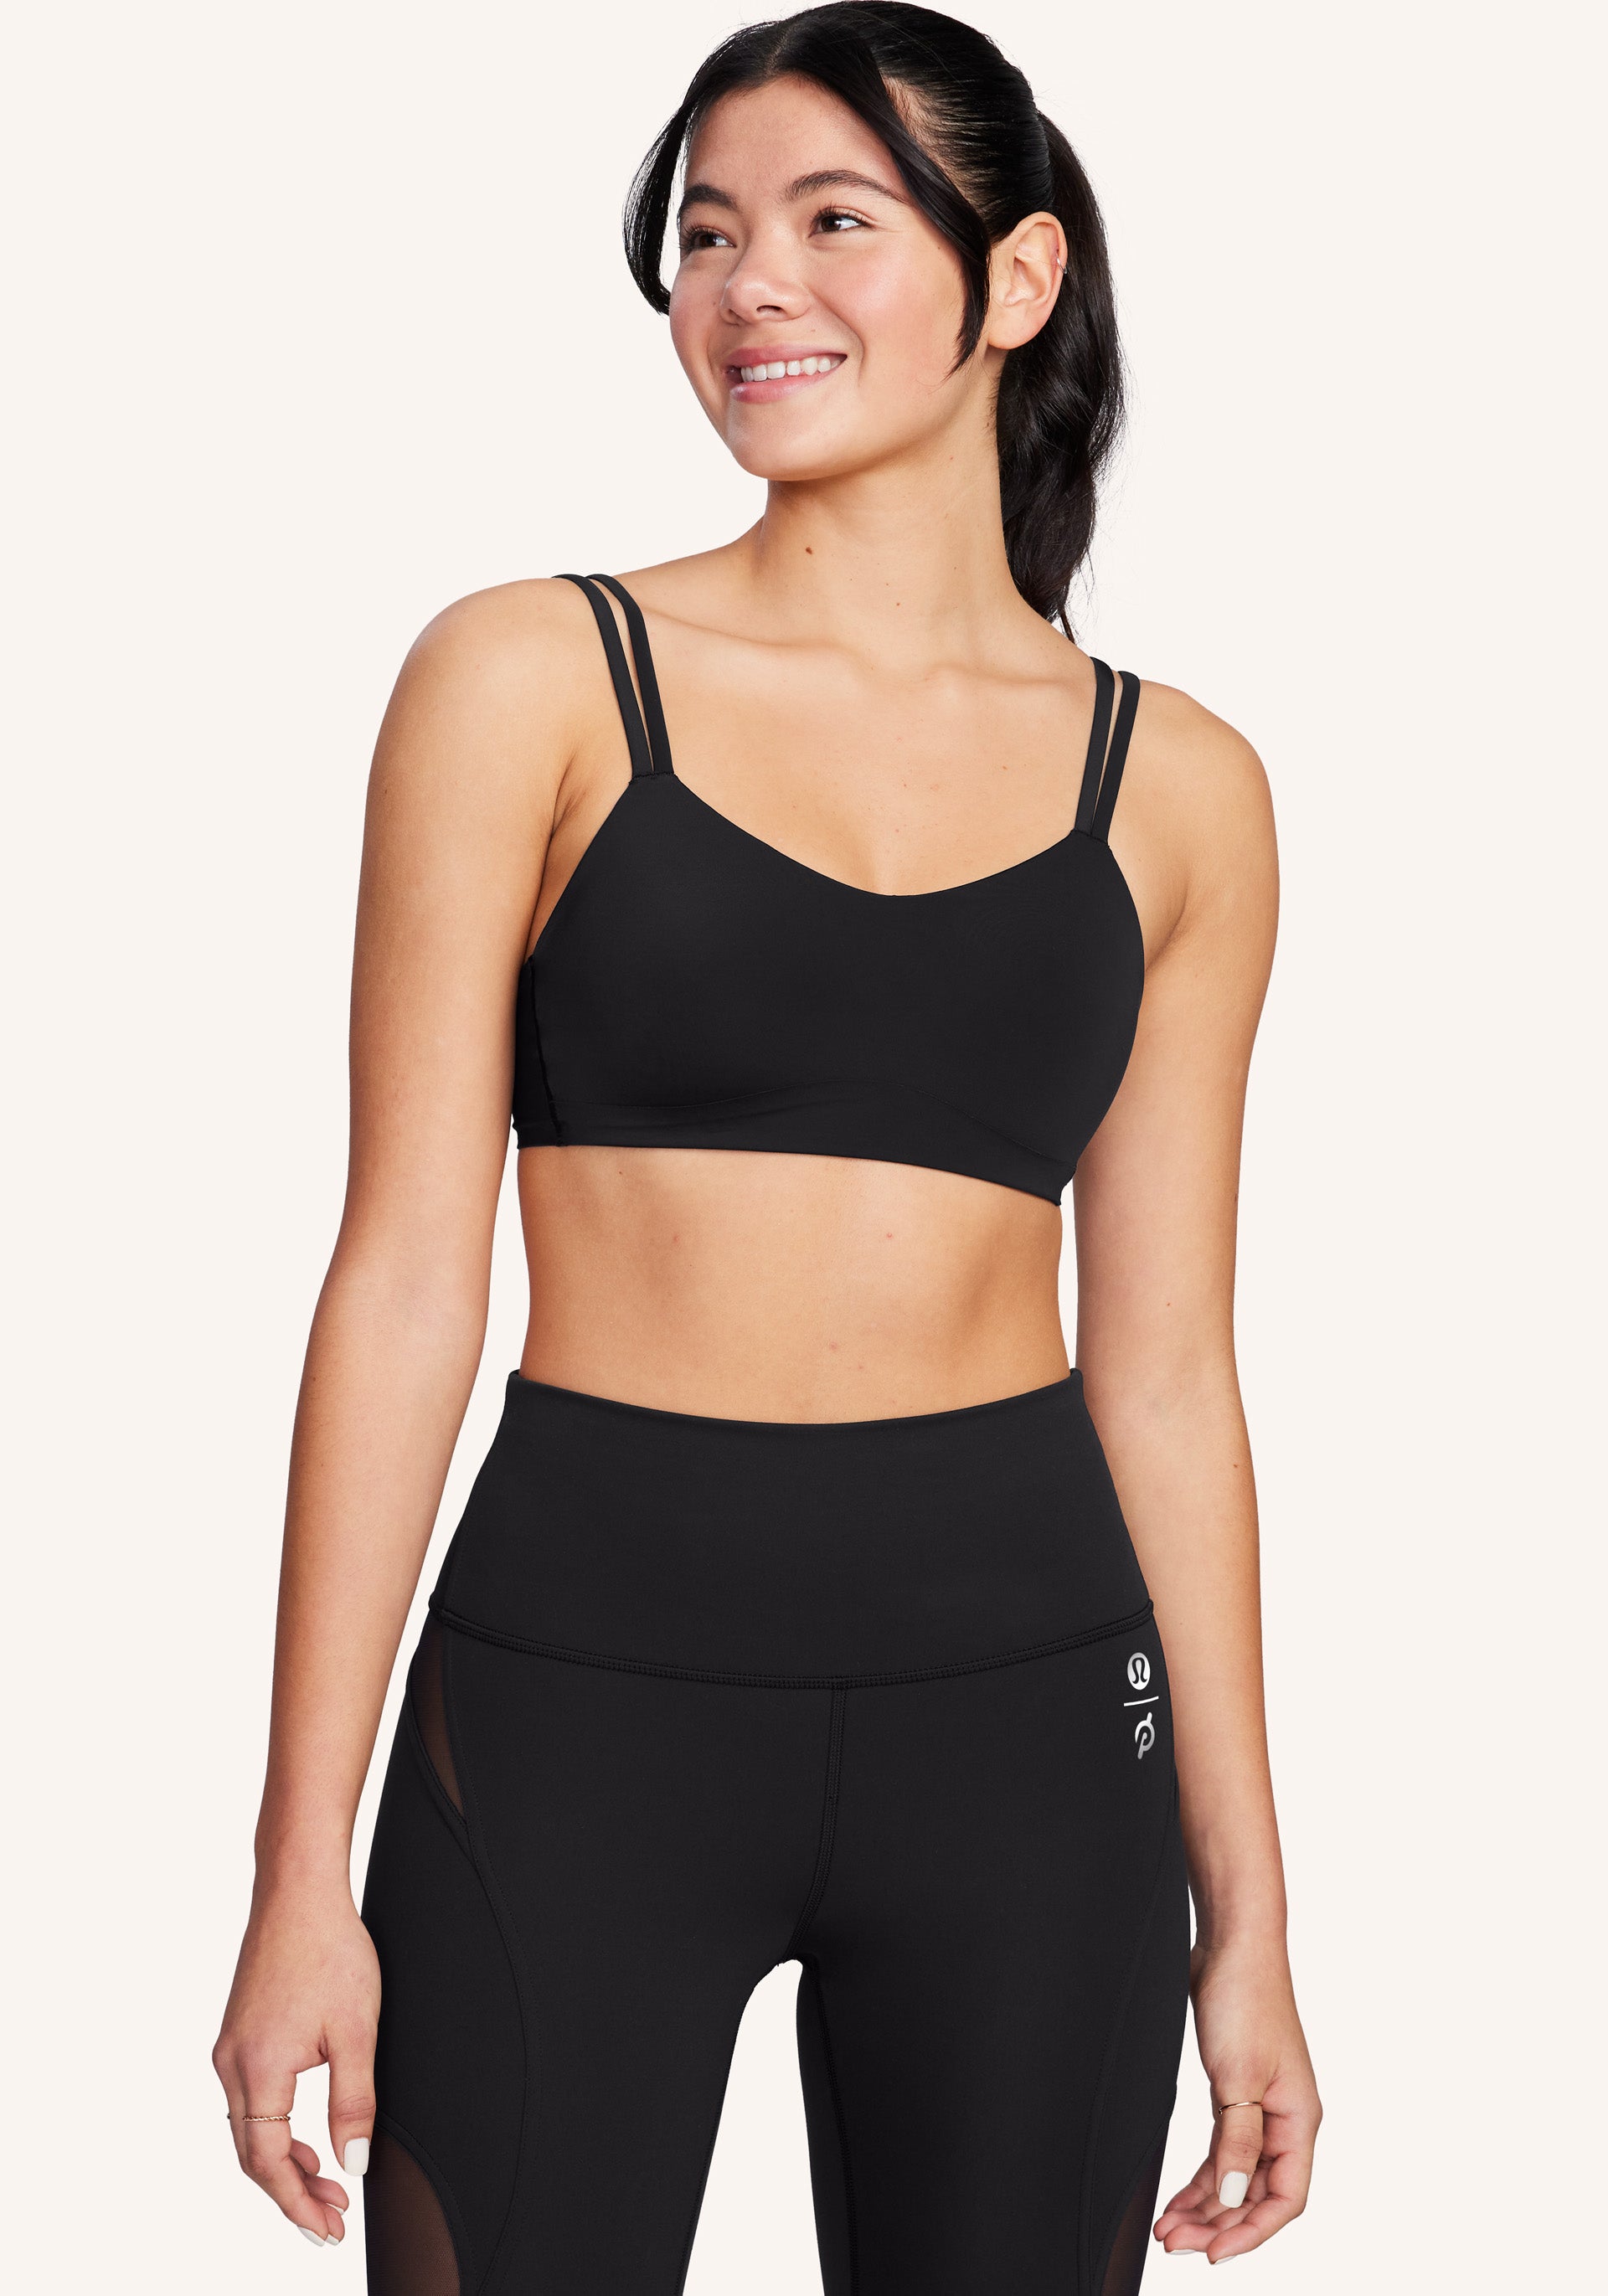 Lululemon In Alignment Straight-Strap Bra size 8 Black Size M - $15 (77%  Off Retail) - From carley